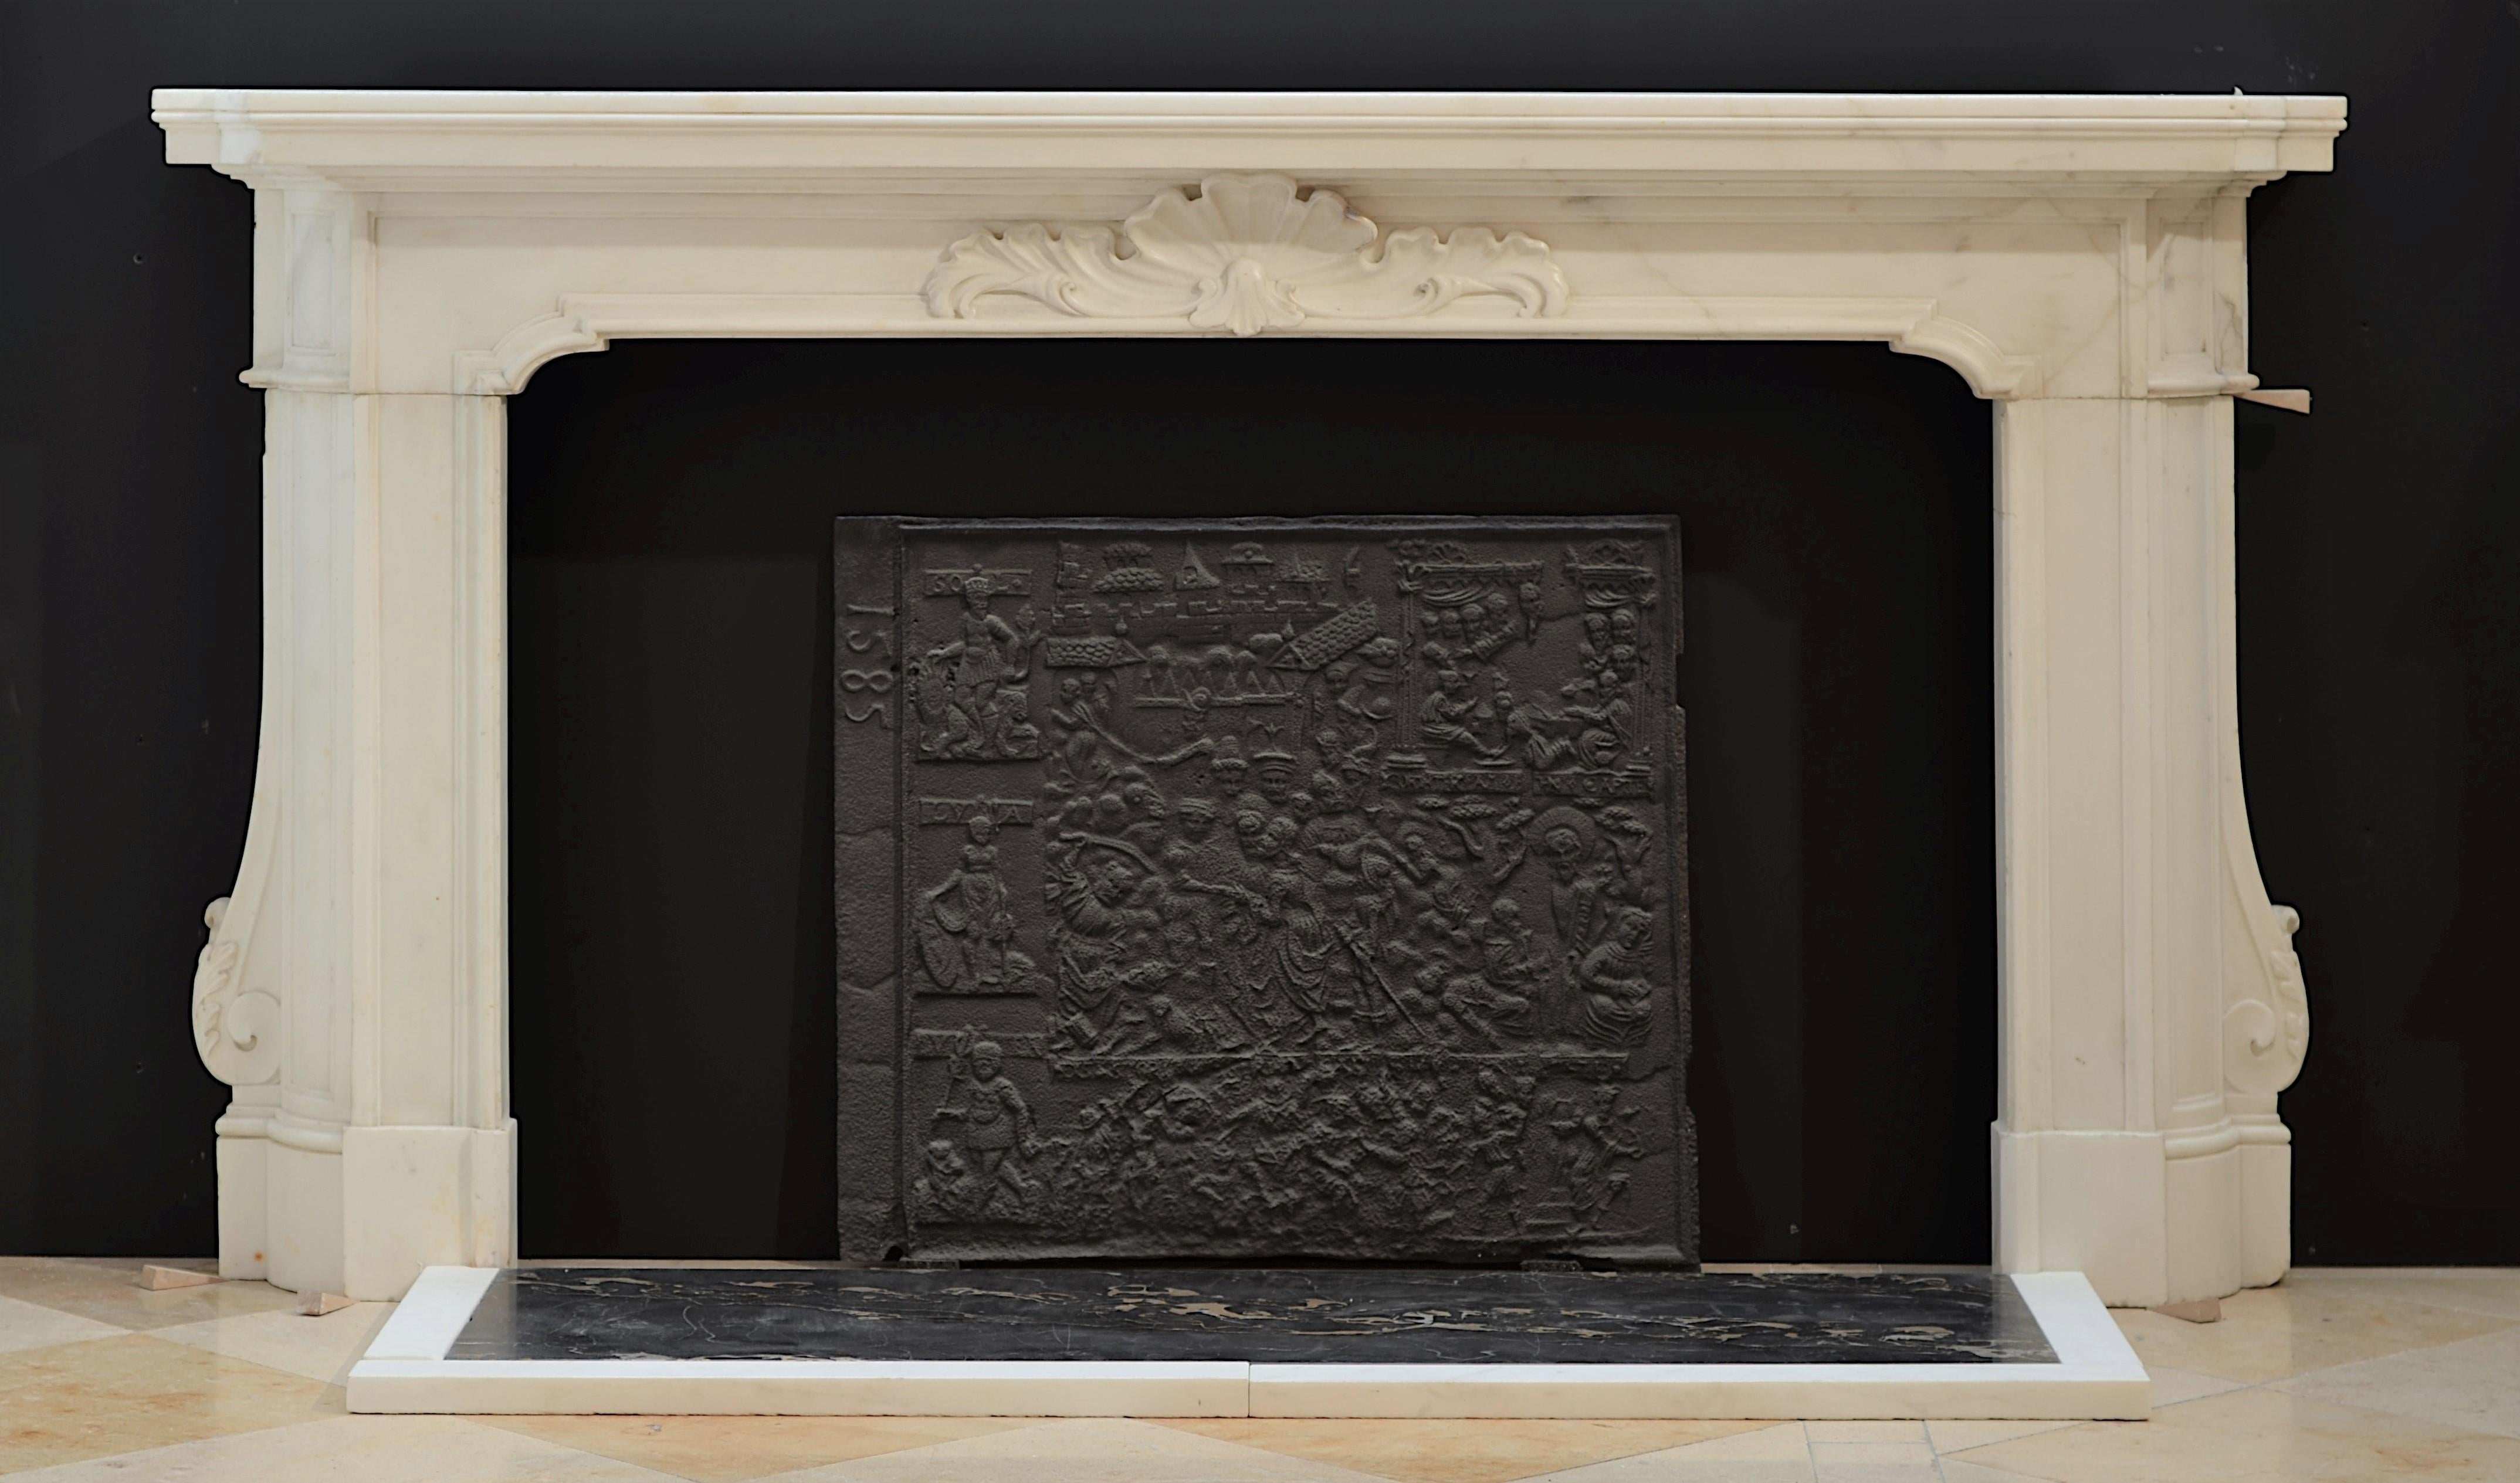 A monumental, 18th century, Italian Baroque fireplace mantel in statuary marble. The frieze, with a beautifully decorated central cartouche, is supported by solid panelled demilune jambs. The floral decorated C- scrolls rest on top of the shaped